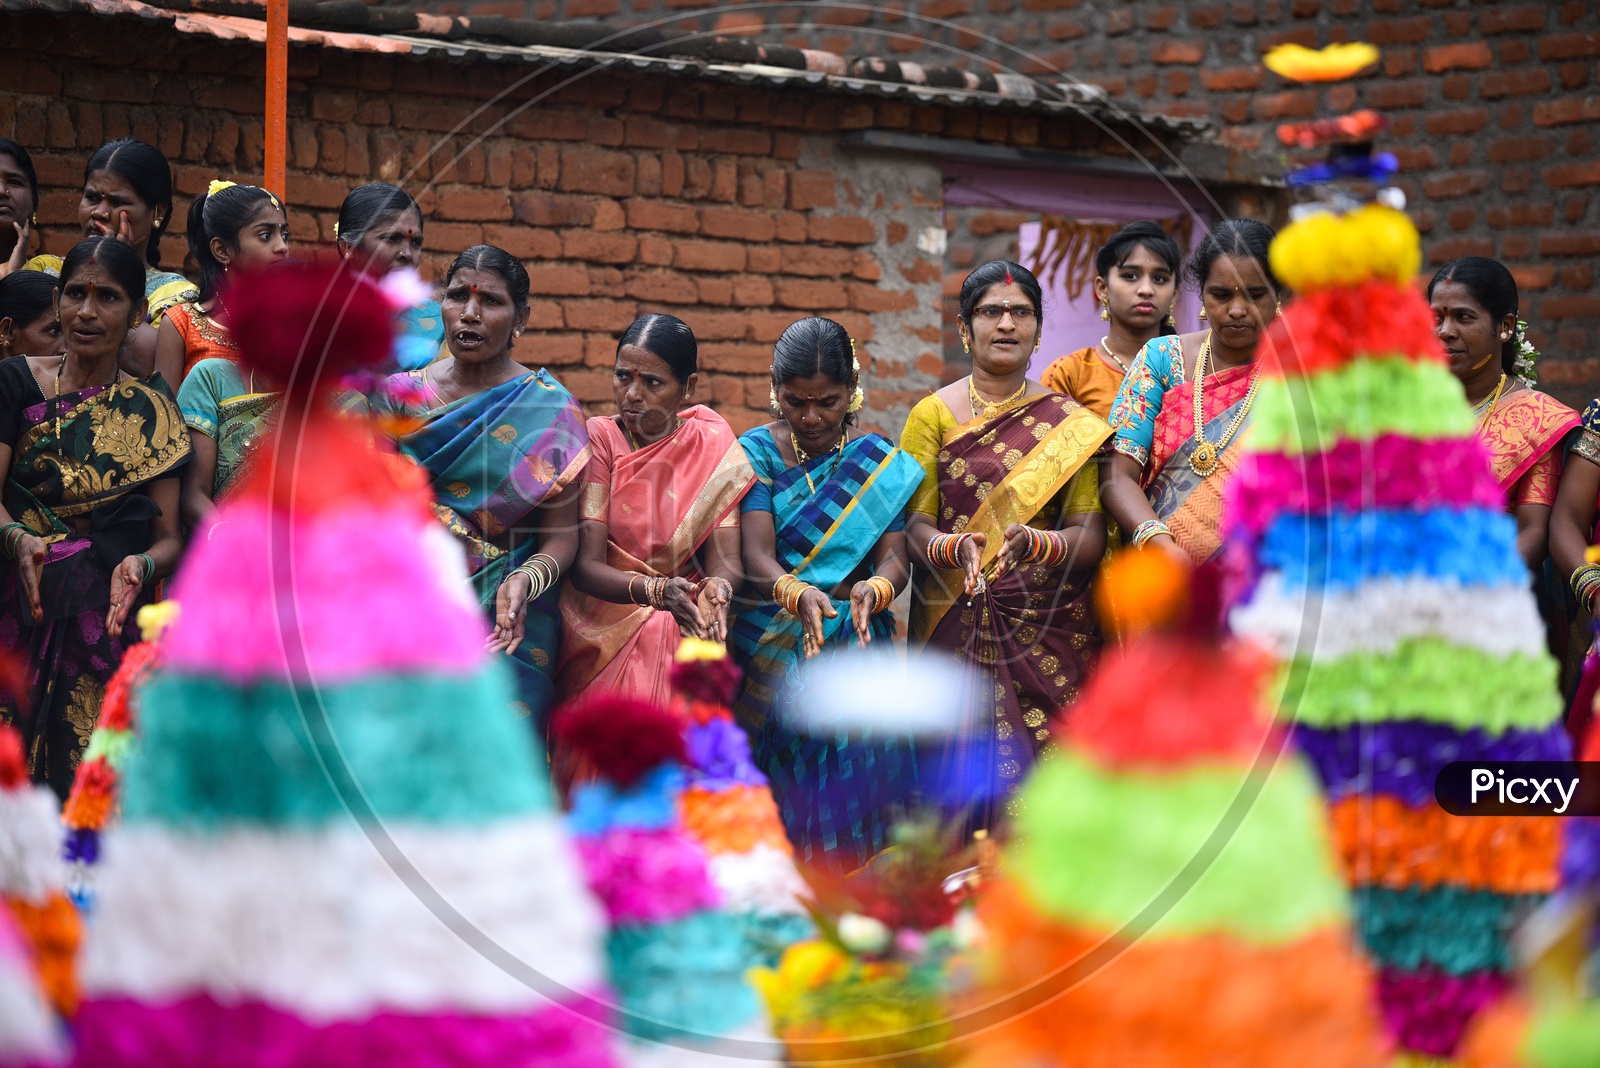 Women dance in front of flower arrangements made especially for Bathukamma, Telangana's most celebrated festival